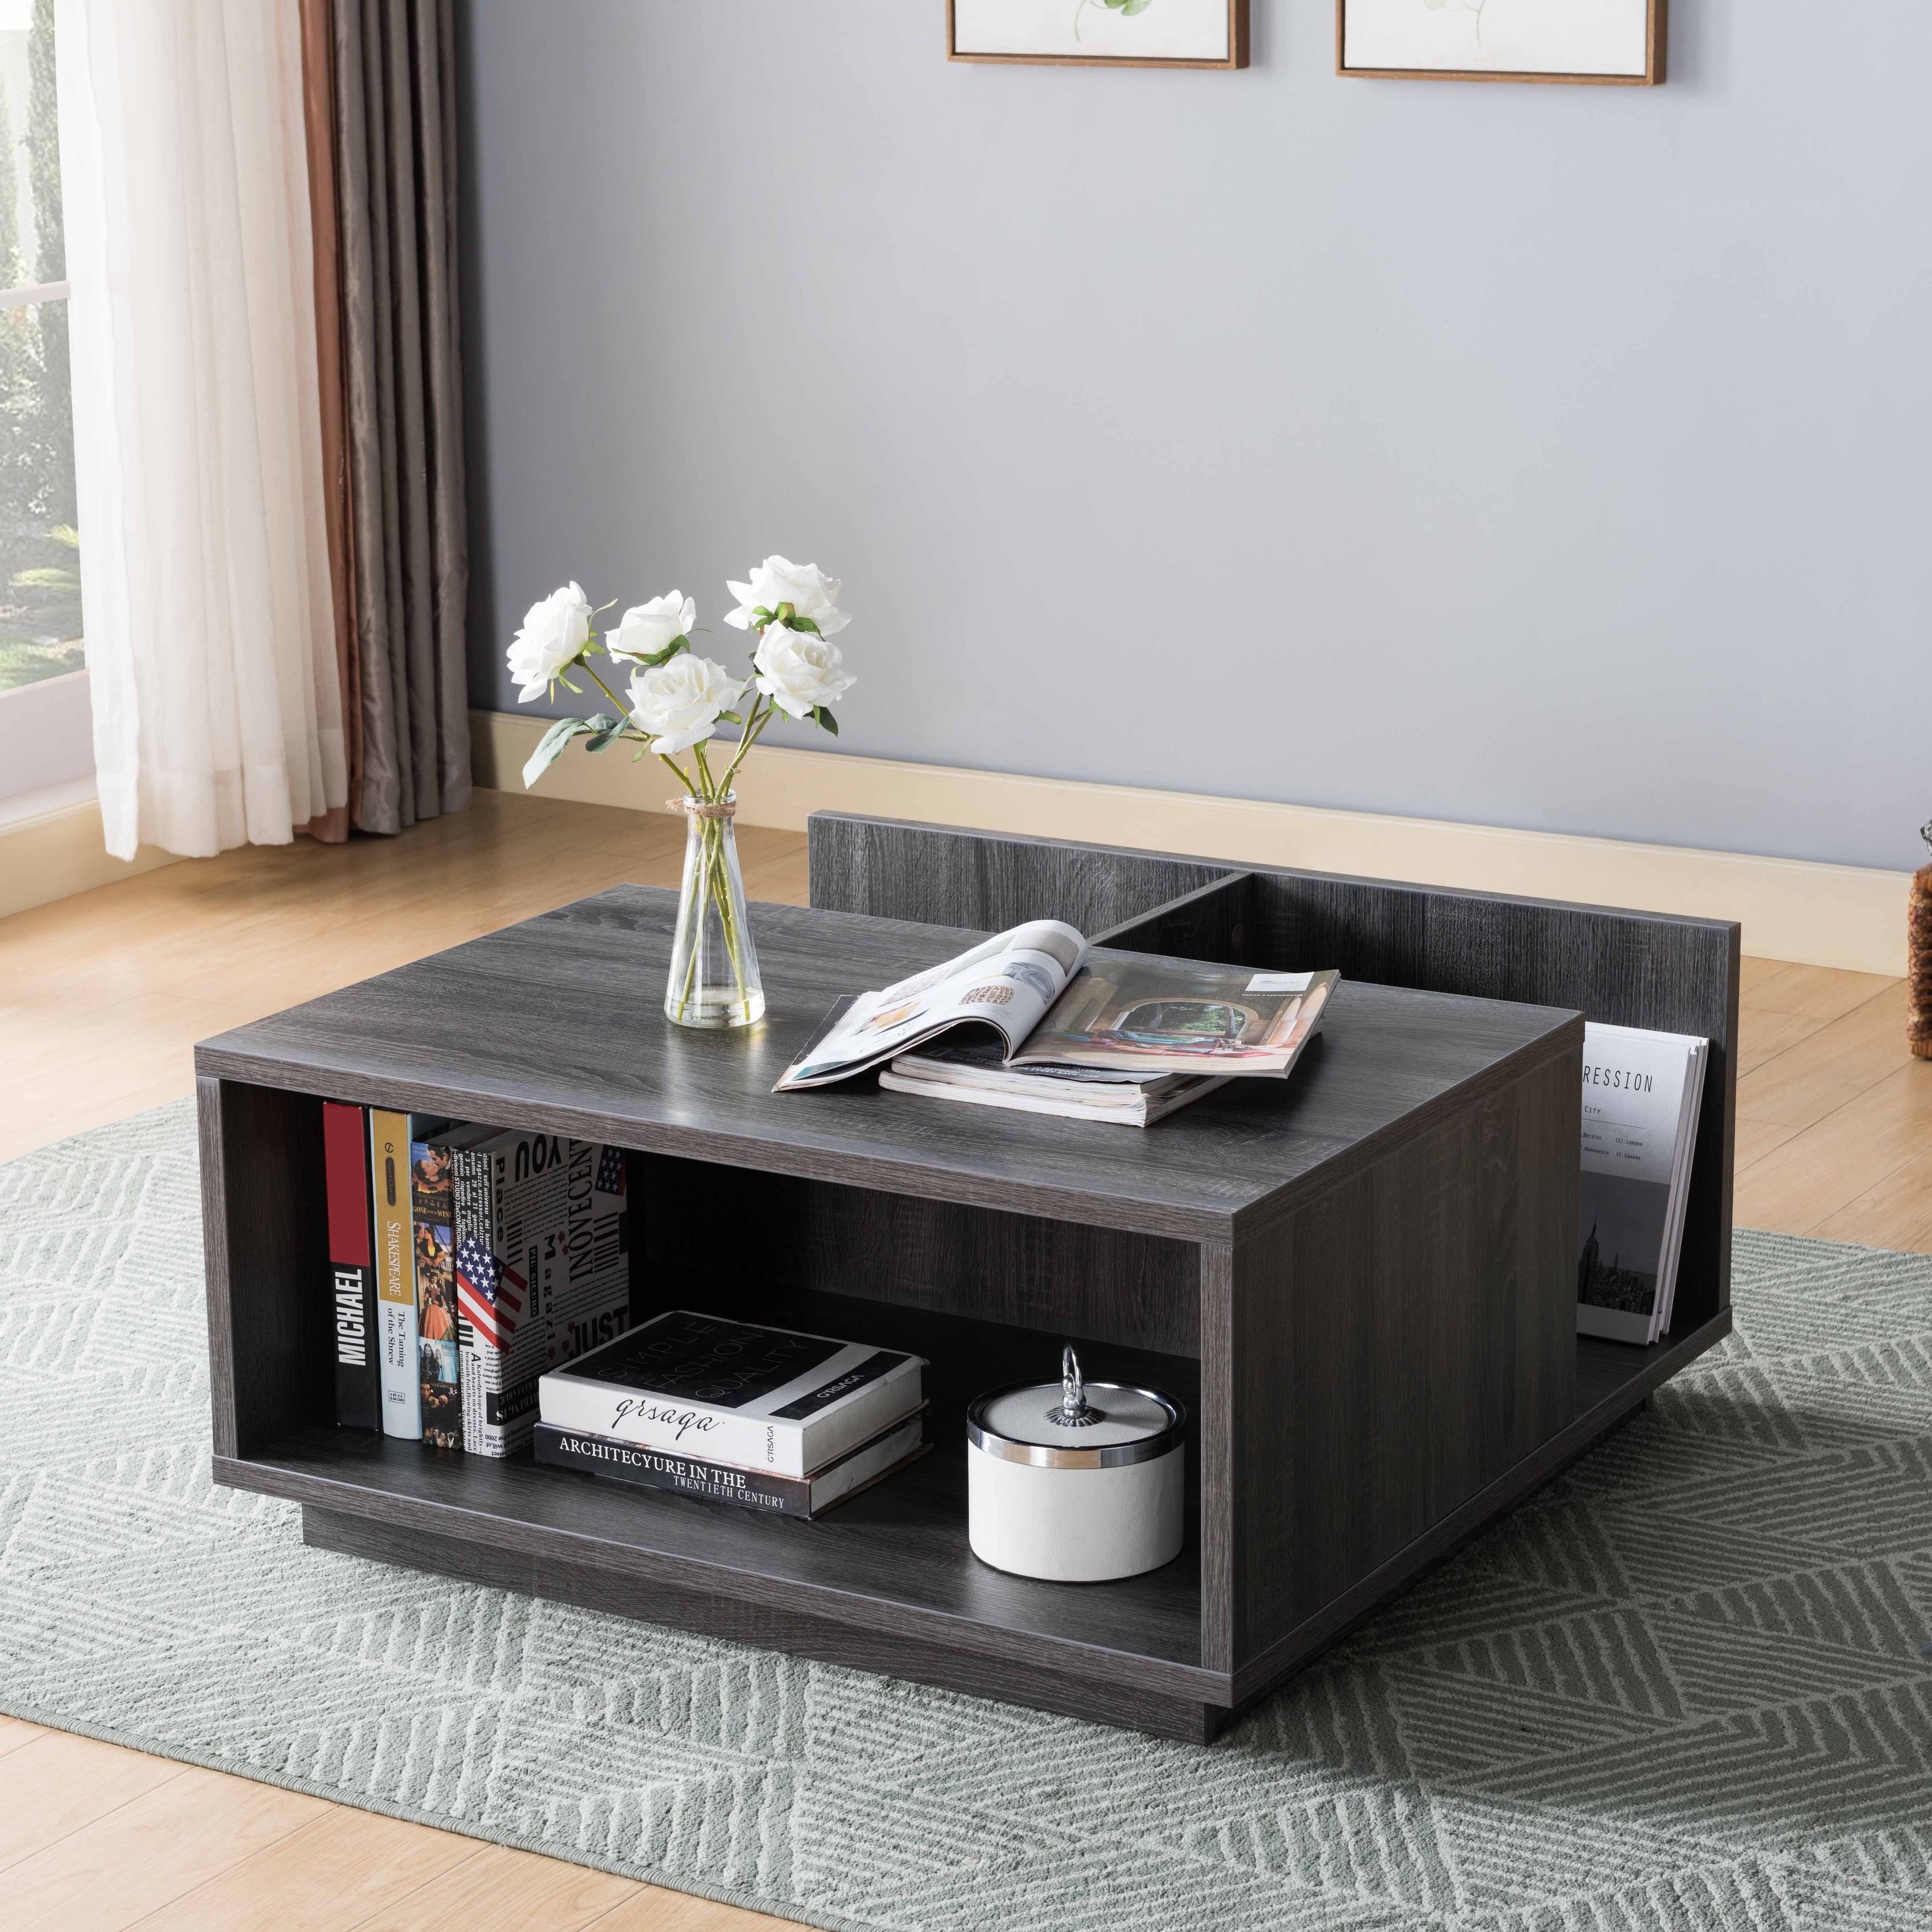 https://ak1.ostkcdn.com/images/products/is/images/direct/058cf562dbeada94687a6bca5a9ea1da543fbf4d/Q-Max-36%22-Square-Shade-Coffee-Table-With-Open-Storage-and-Pull-Out-Space-In-Distressed-Gray-Finish.jpg